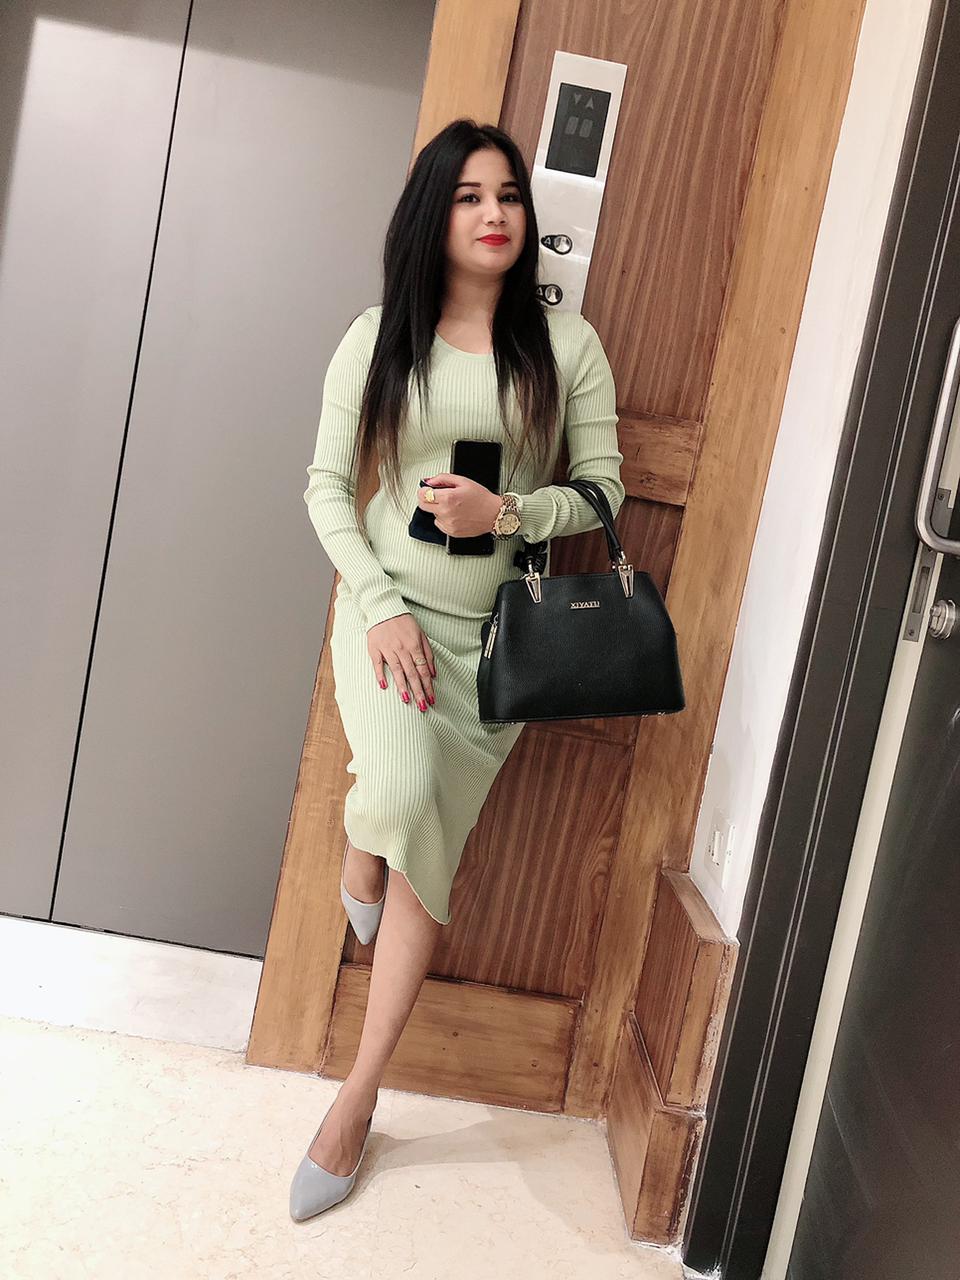 Ranchi BEST SAFE AND GENINUE VIP LOW BUDGET CALL GIRL CALL ME NOW